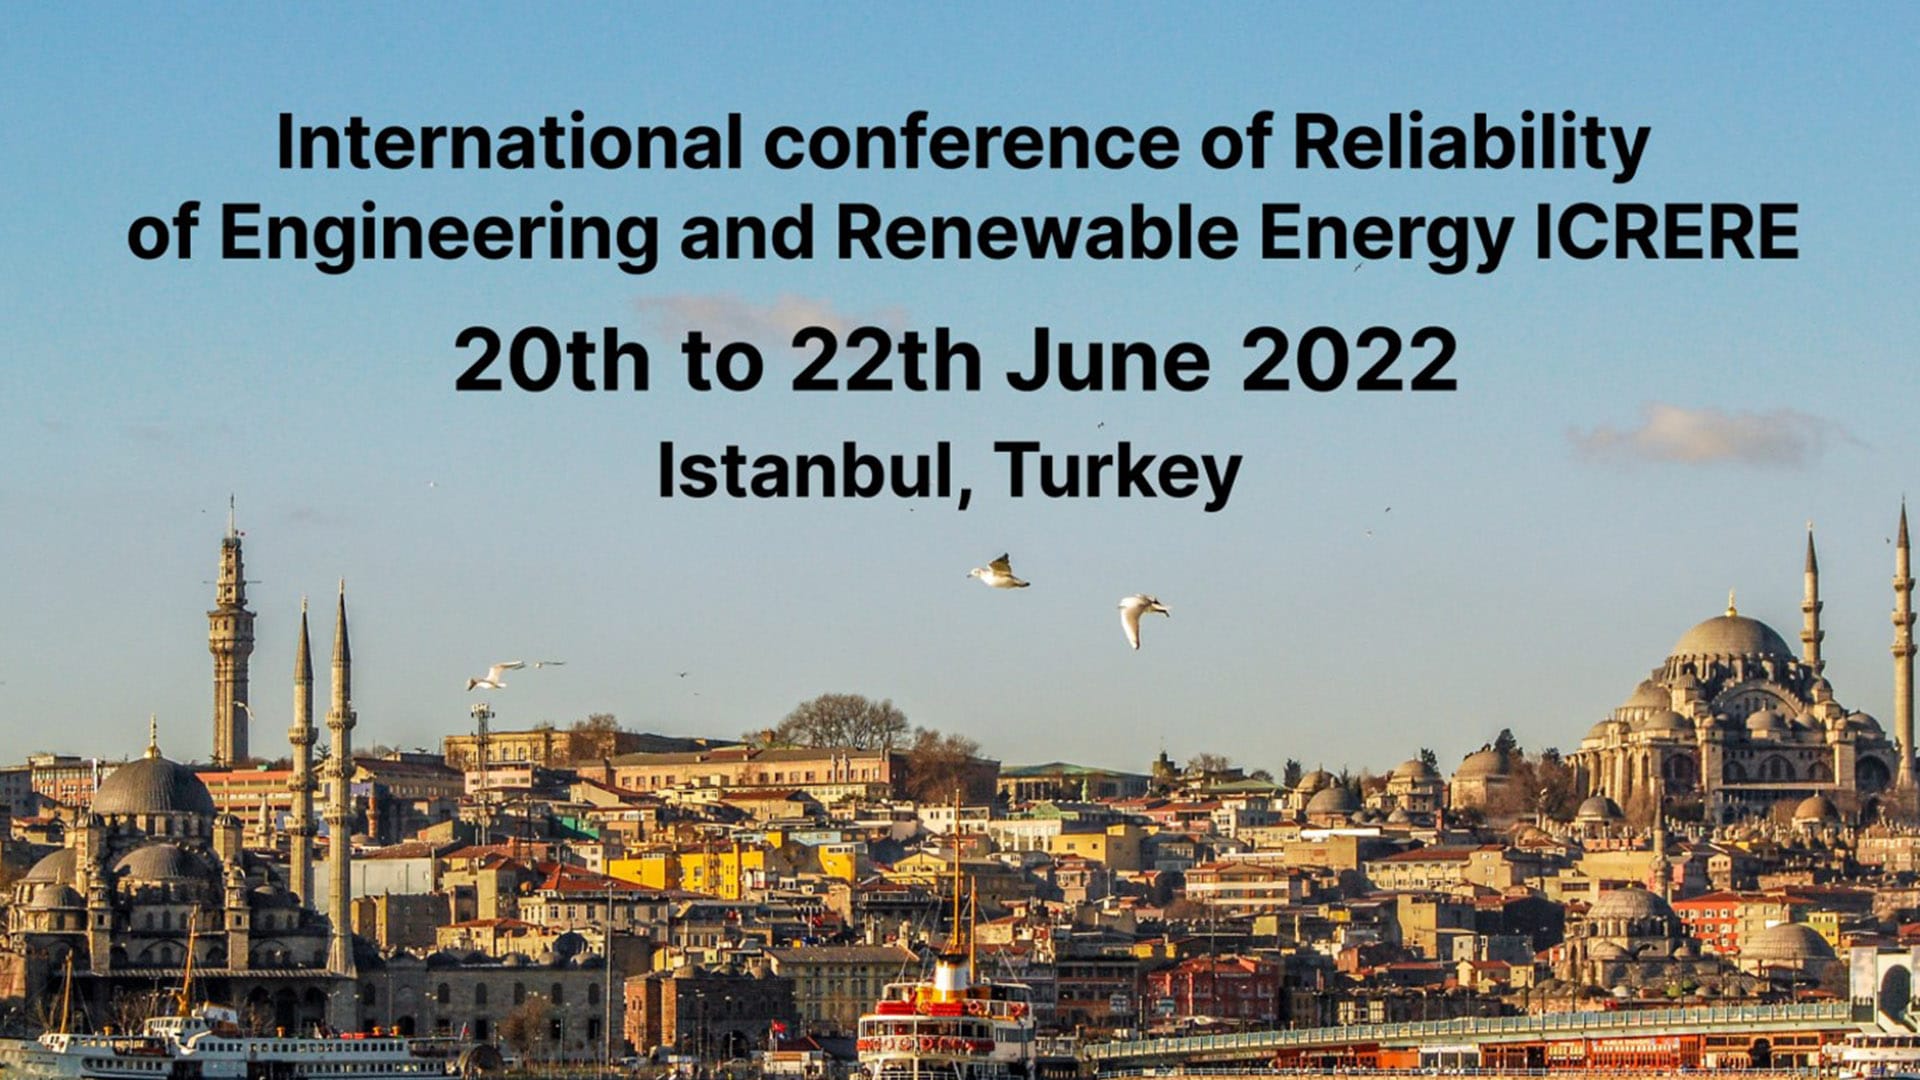 International conference of Reliability of Engineering and Renewable Energy (ICRERE)